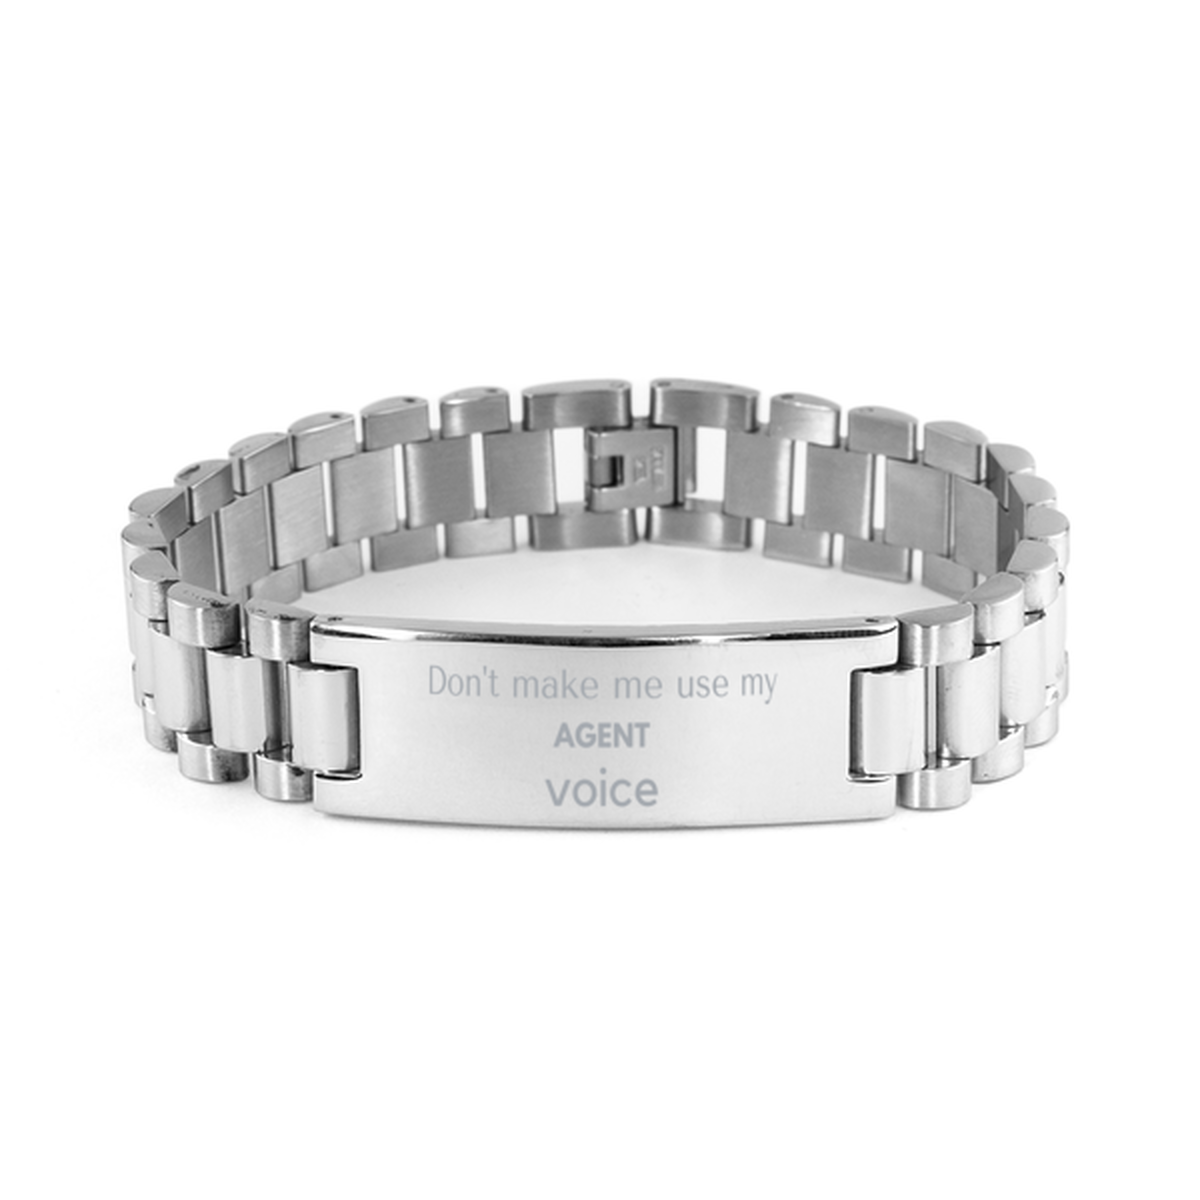 Don't make me use my Agent voice, Sarcasm Agent Gifts, Christmas Agent Ladder Stainless Steel Bracelet Birthday Unique Gifts For Agent Coworkers, Men, Women, Colleague, Friends